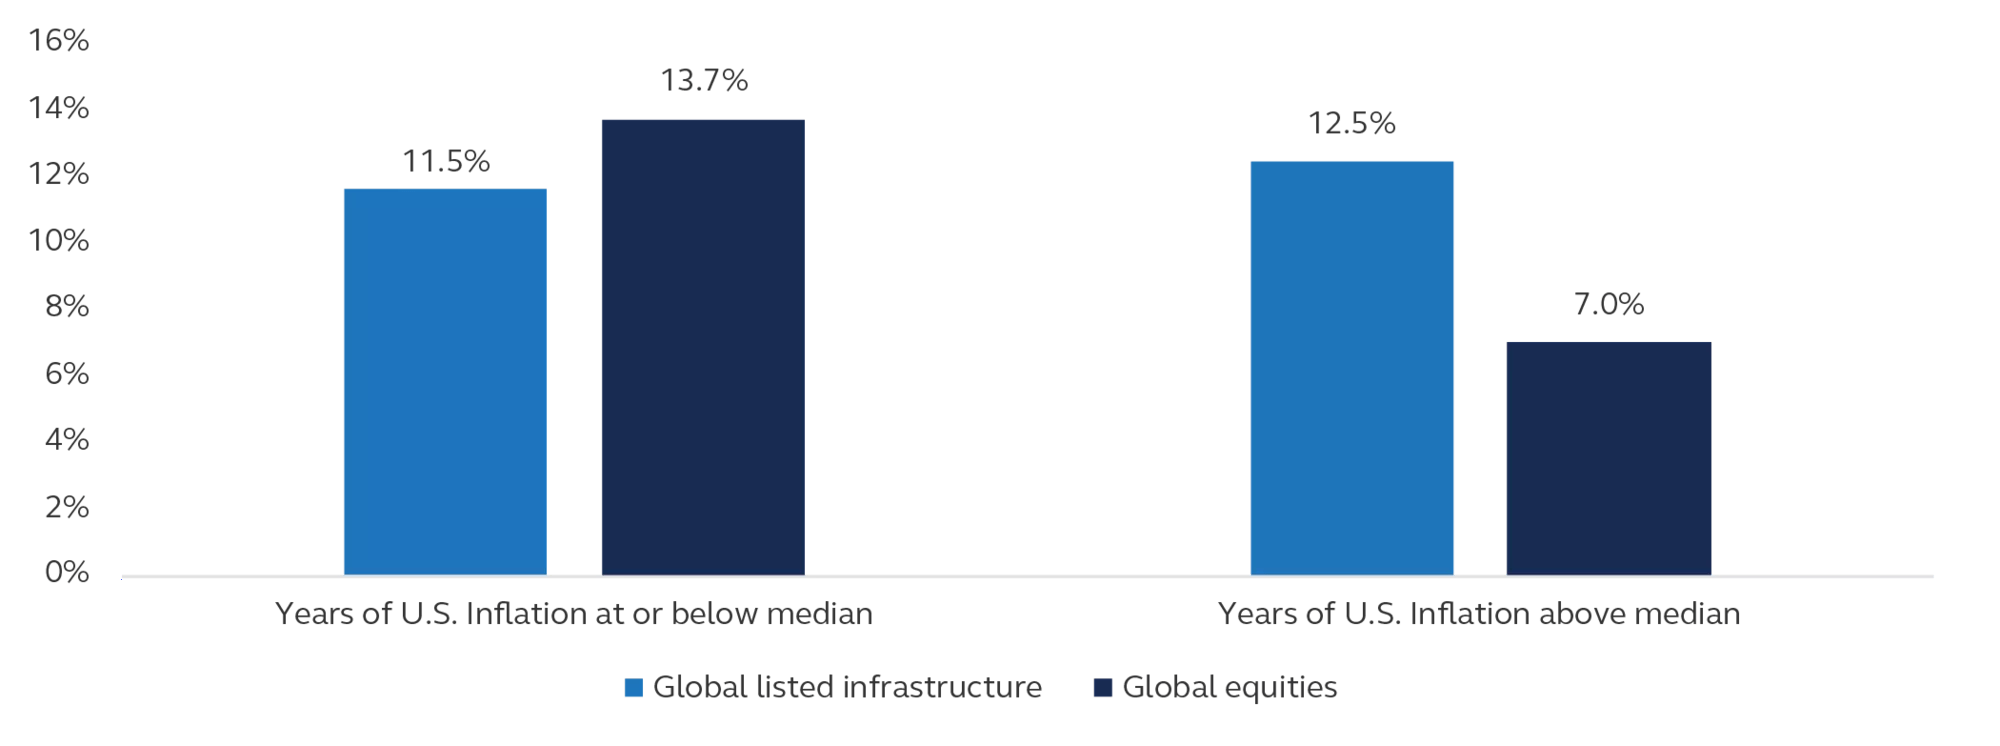 Bar chart showing average annualized returns of global listed infrastructure and global equities from 2002-2022